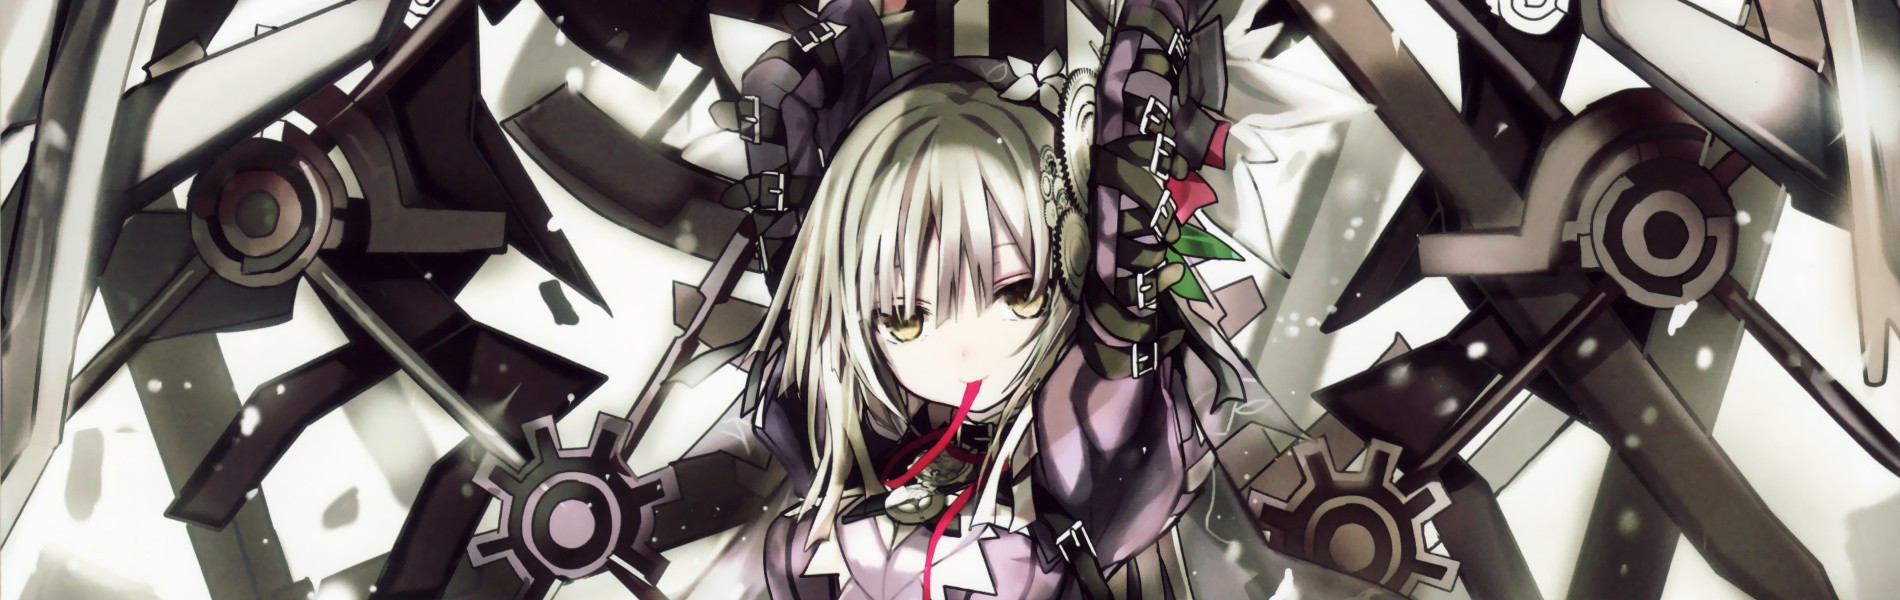 Clockwork Planet - The Spring 2017 Anime Preview Guide - Anime News Network